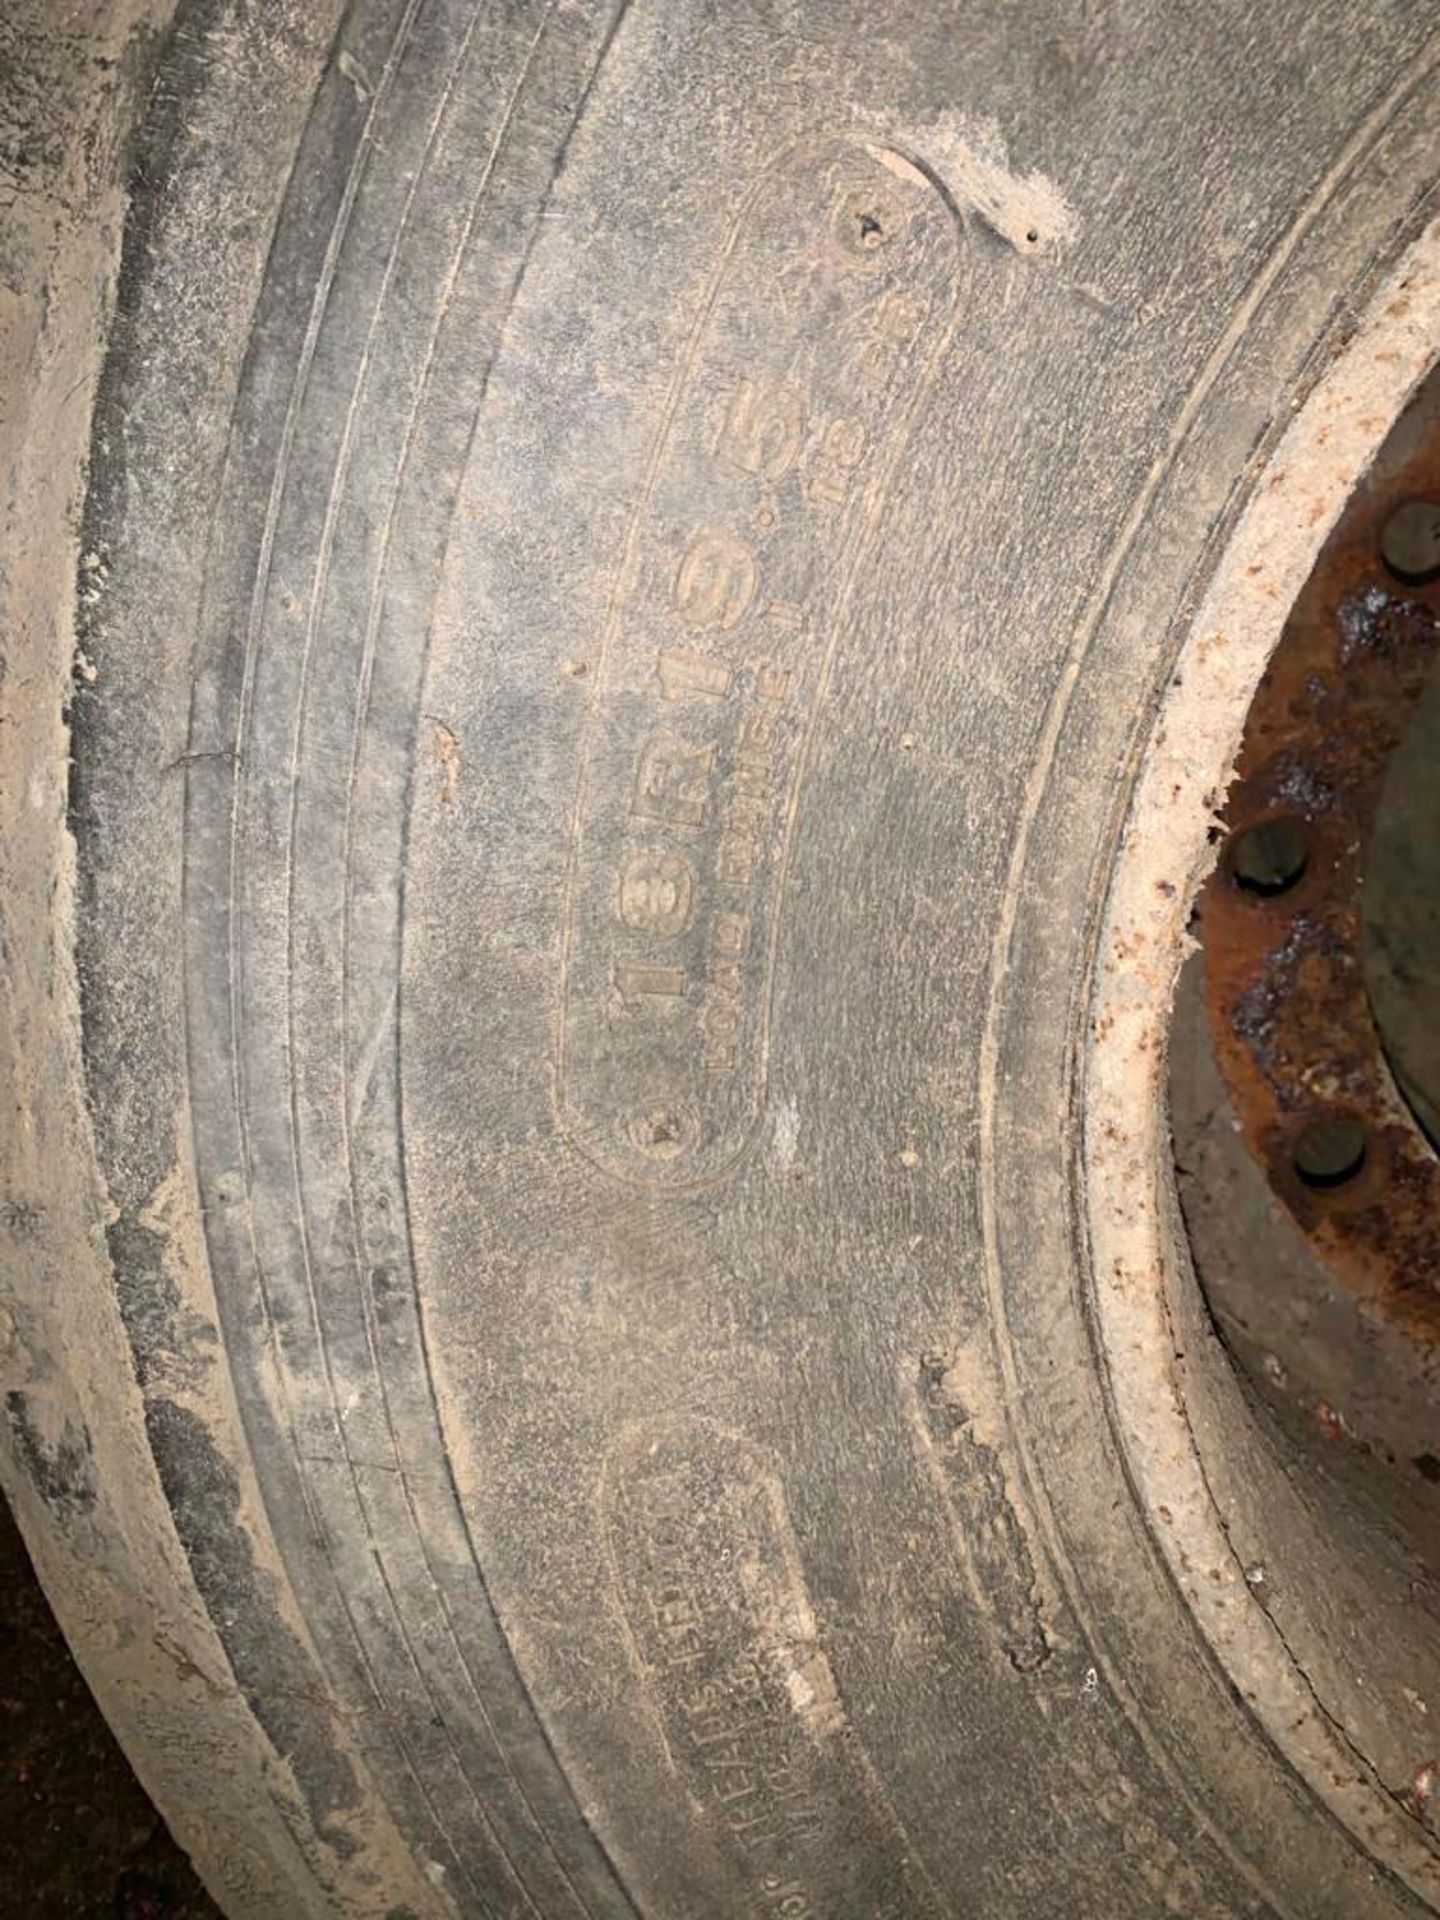 8 x 18R19.5 Tyres and Wheels - were previously on trailers. Stored near Chatteris, Cambridgeshire. - Image 2 of 2